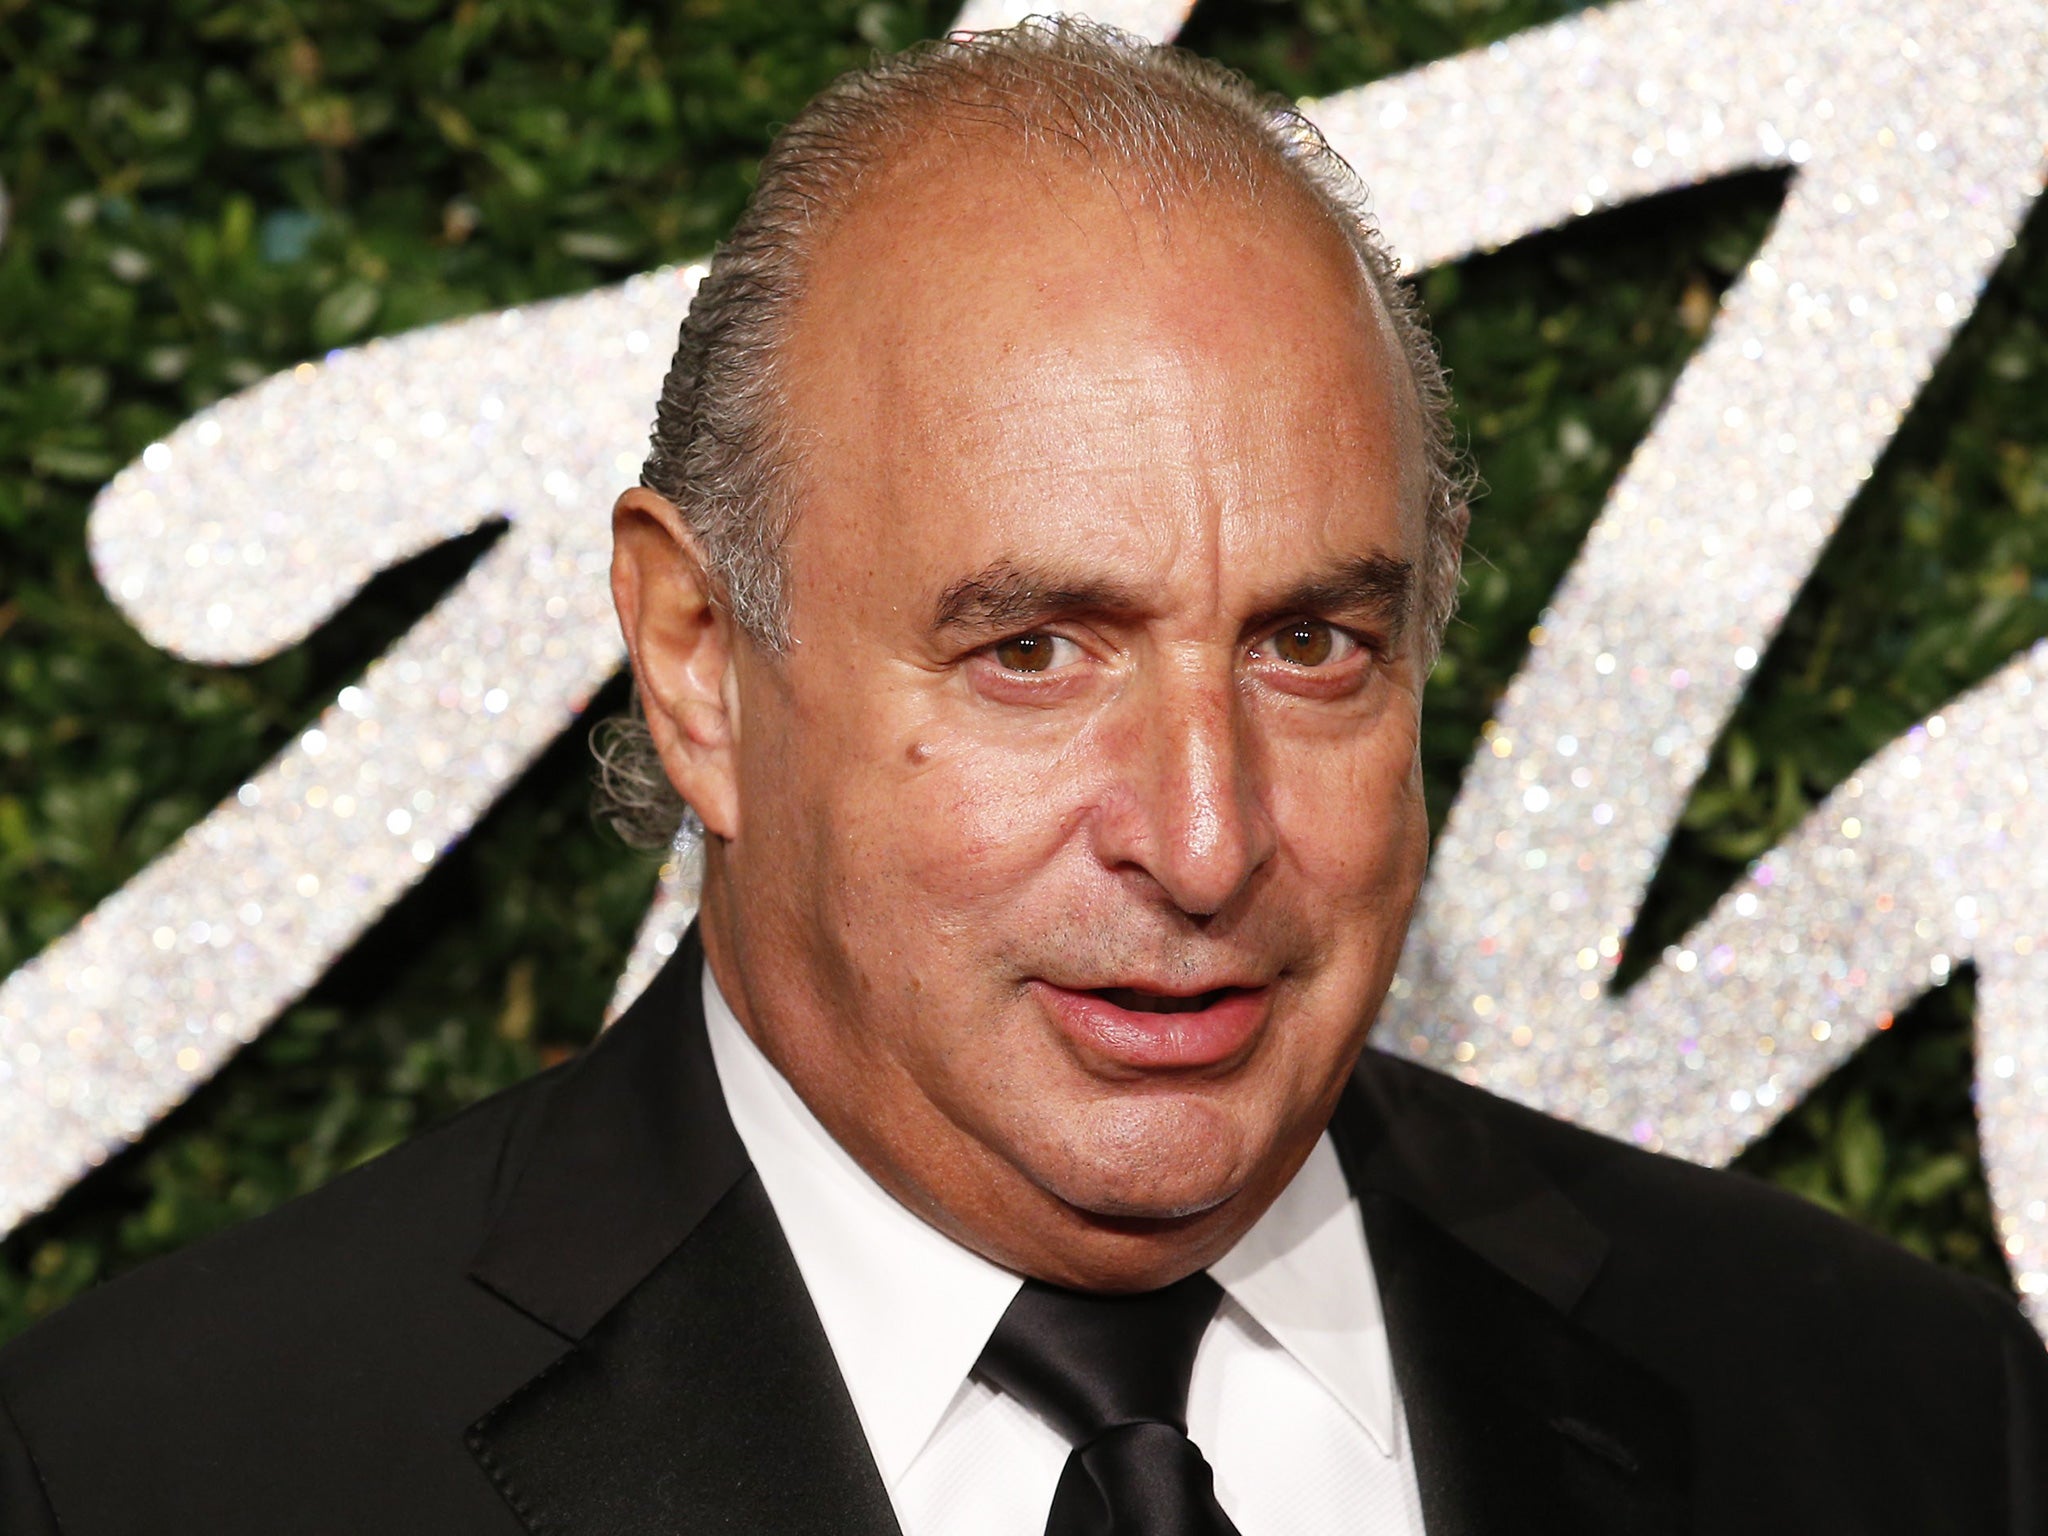 MPs vote unanimously to strip Sir Philip Green of his Knighthood The